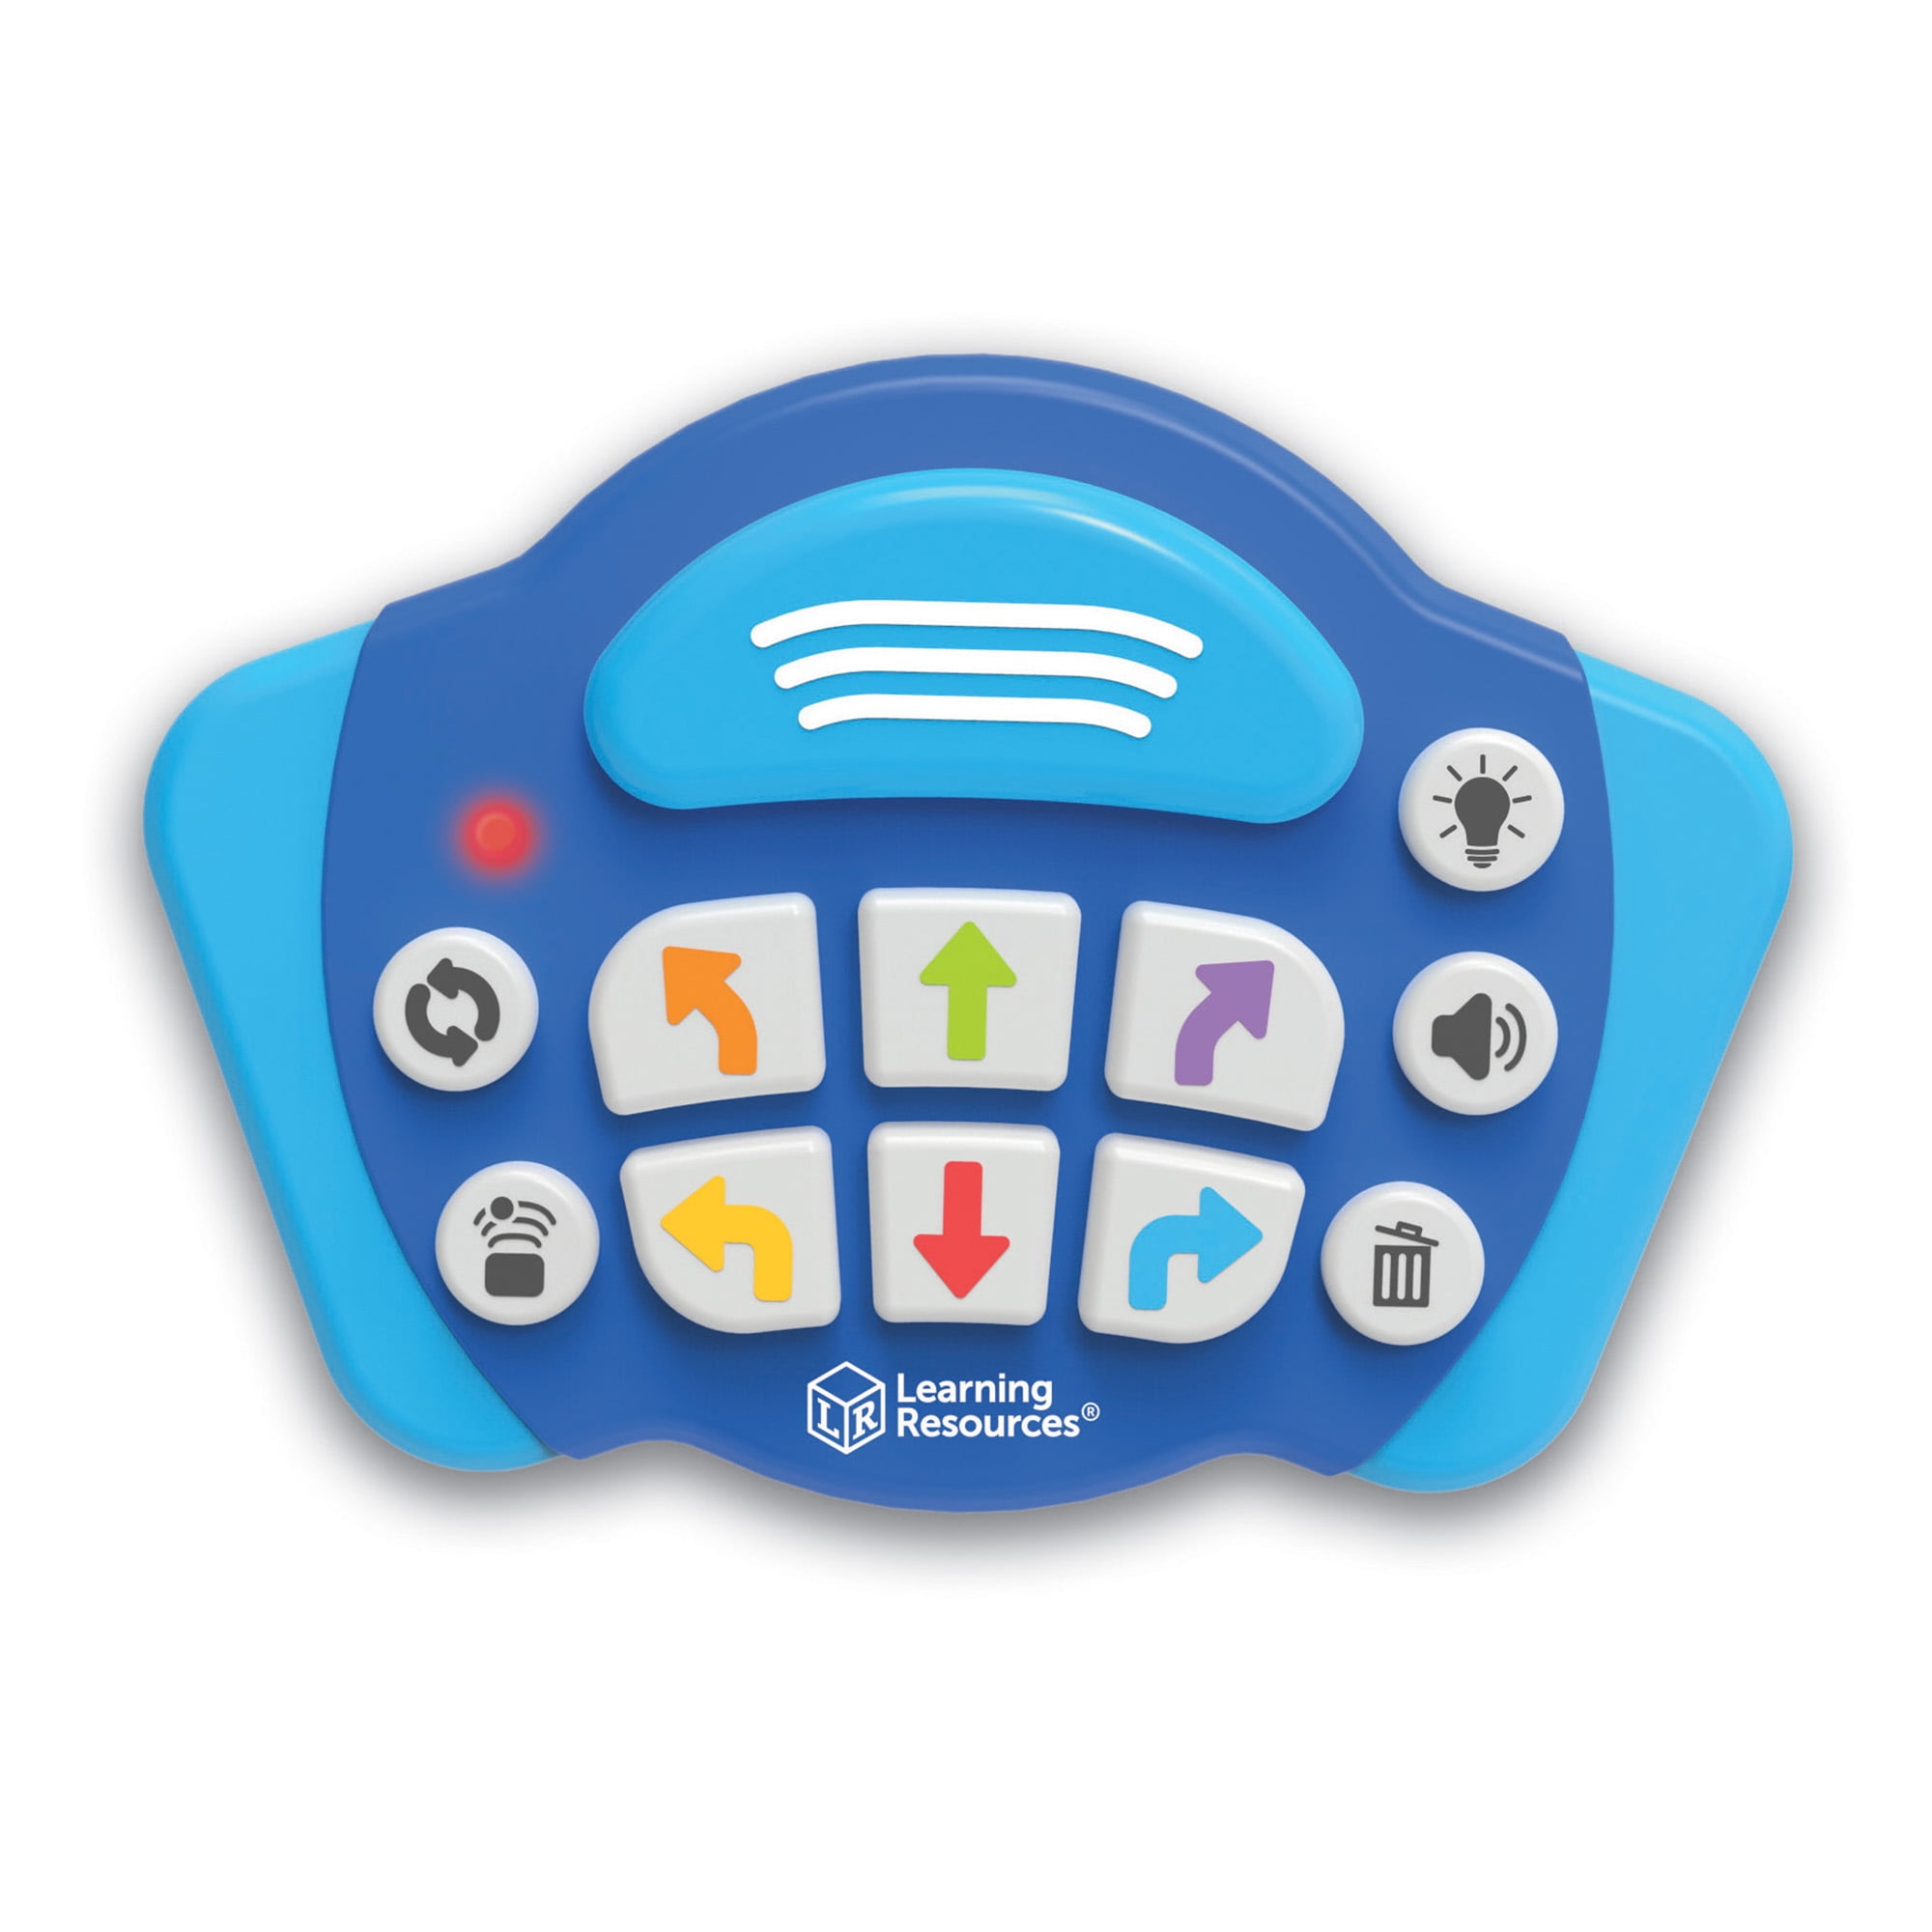 Learning Resources Botley The Coding Robot Facemask 4-pack : Target